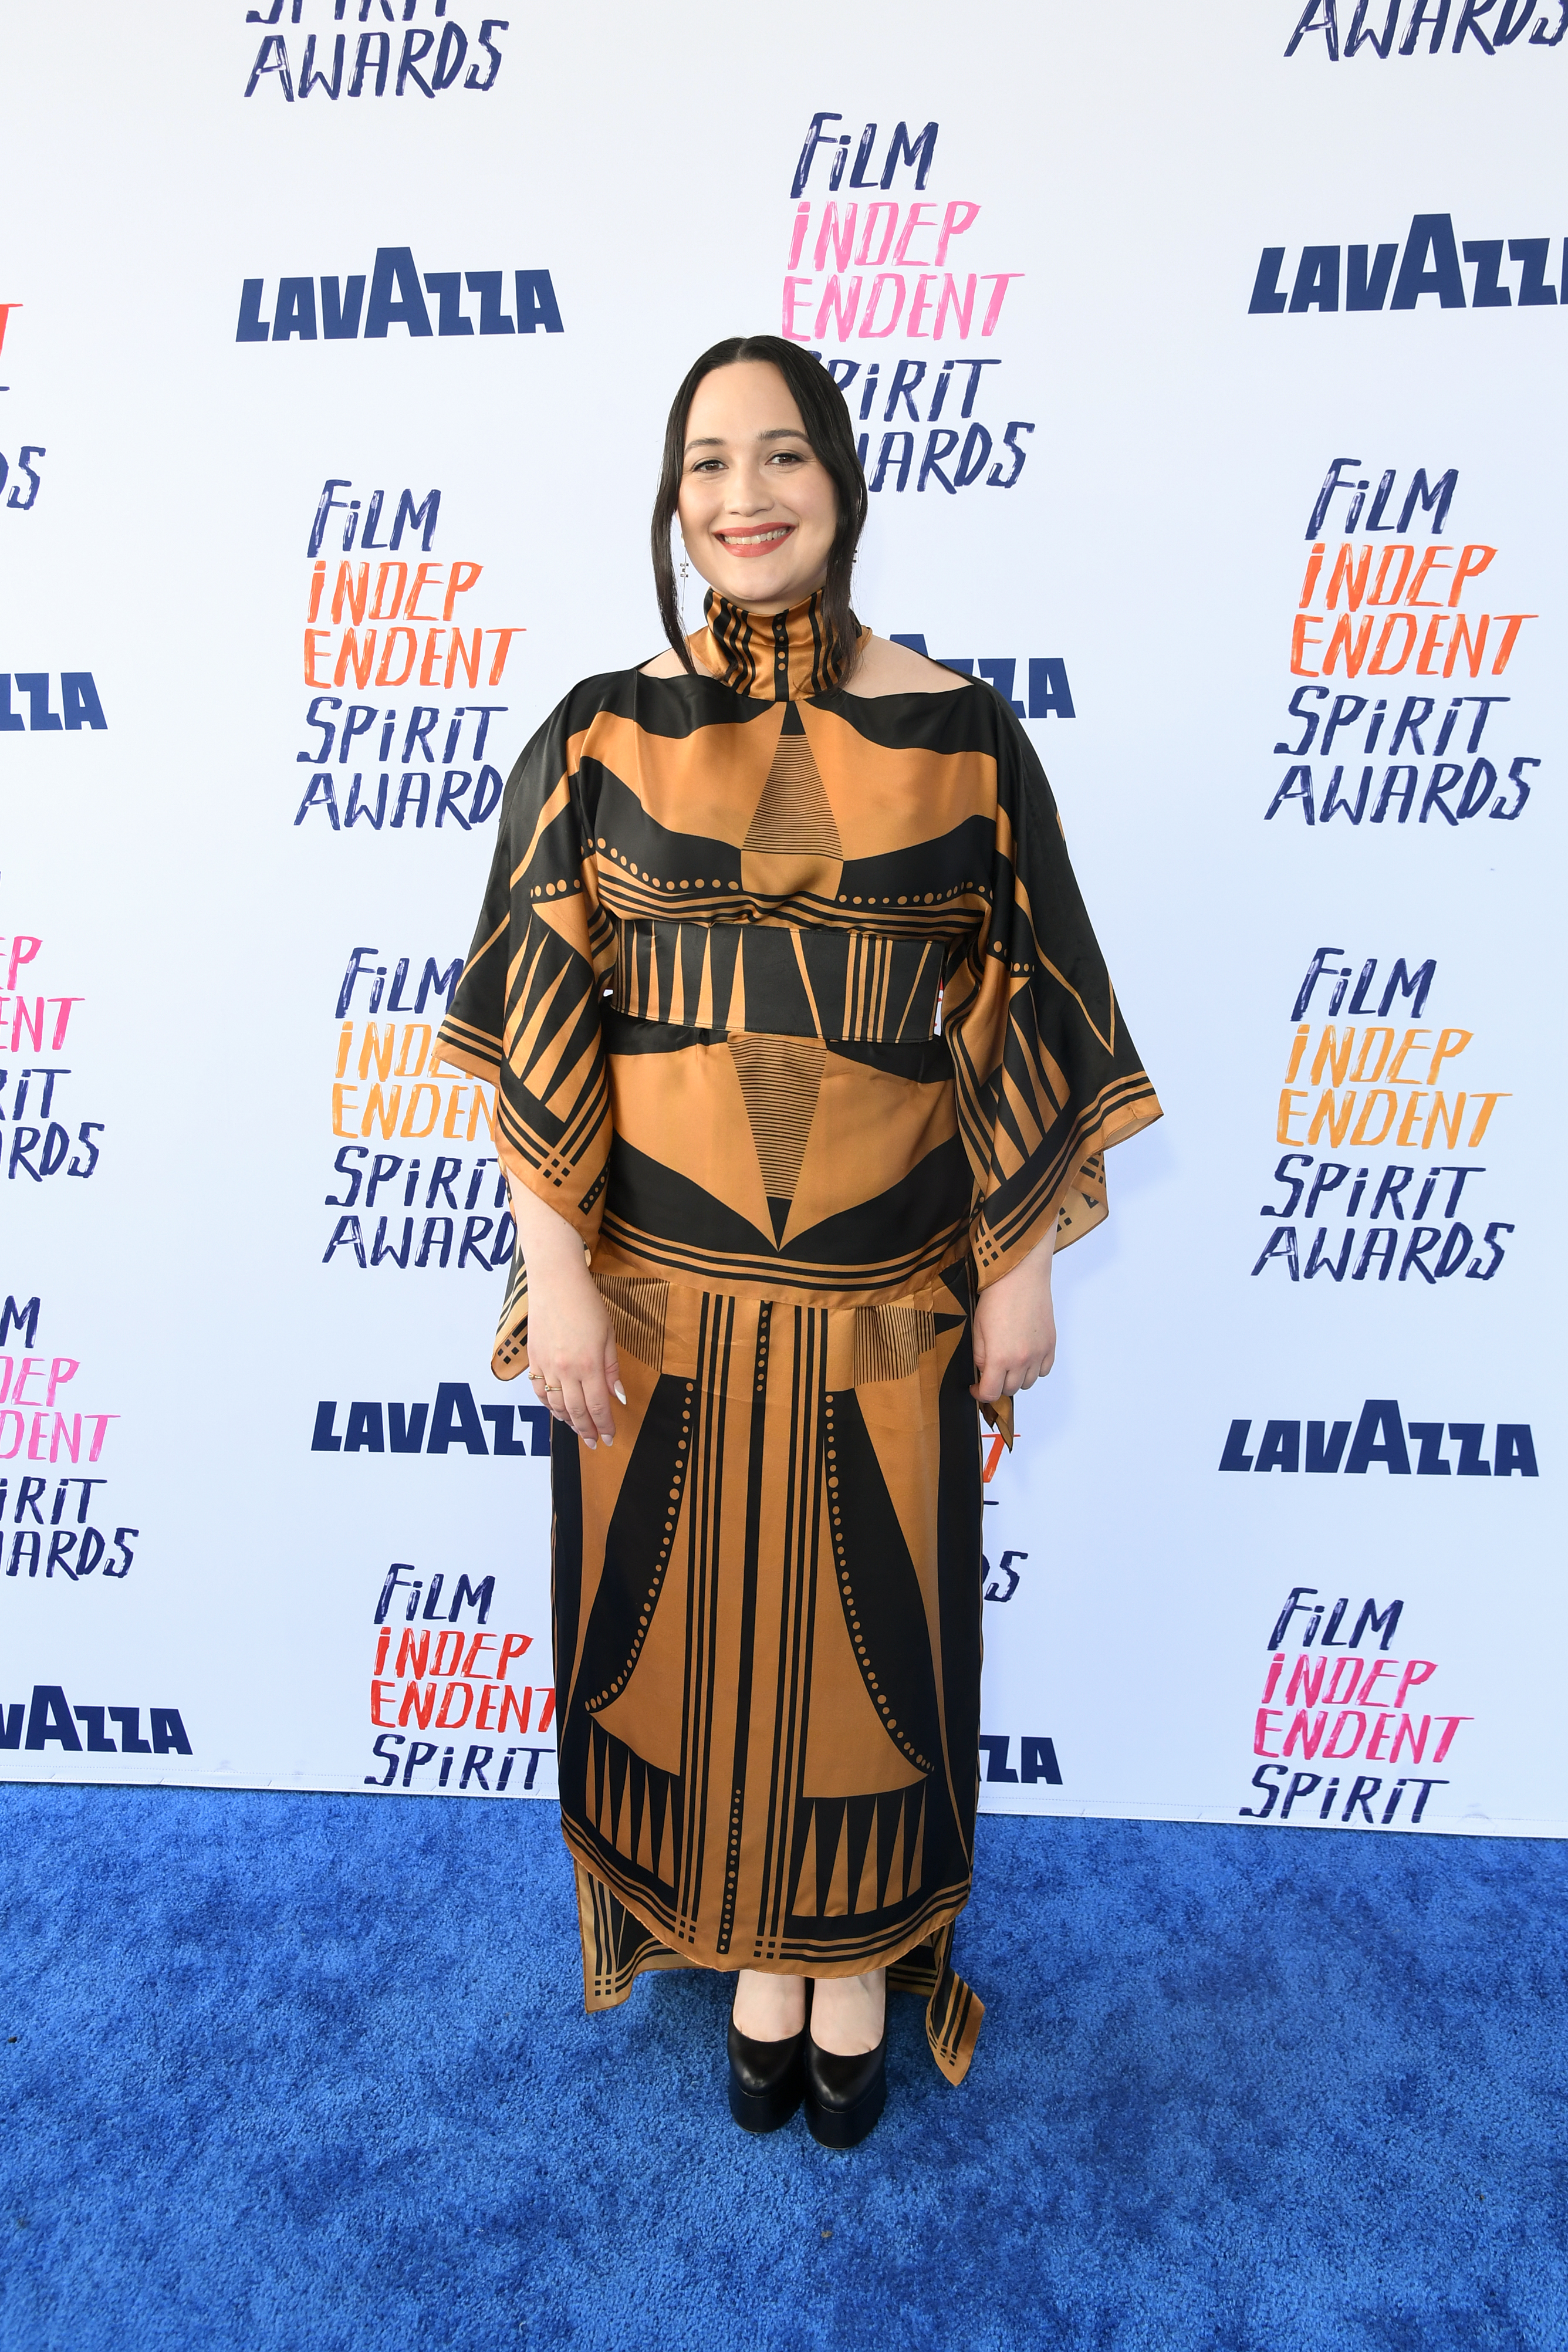 Lily in a patterned dress with mid-length sleeves and ruffled collar at the Film Independent Spirit Awards